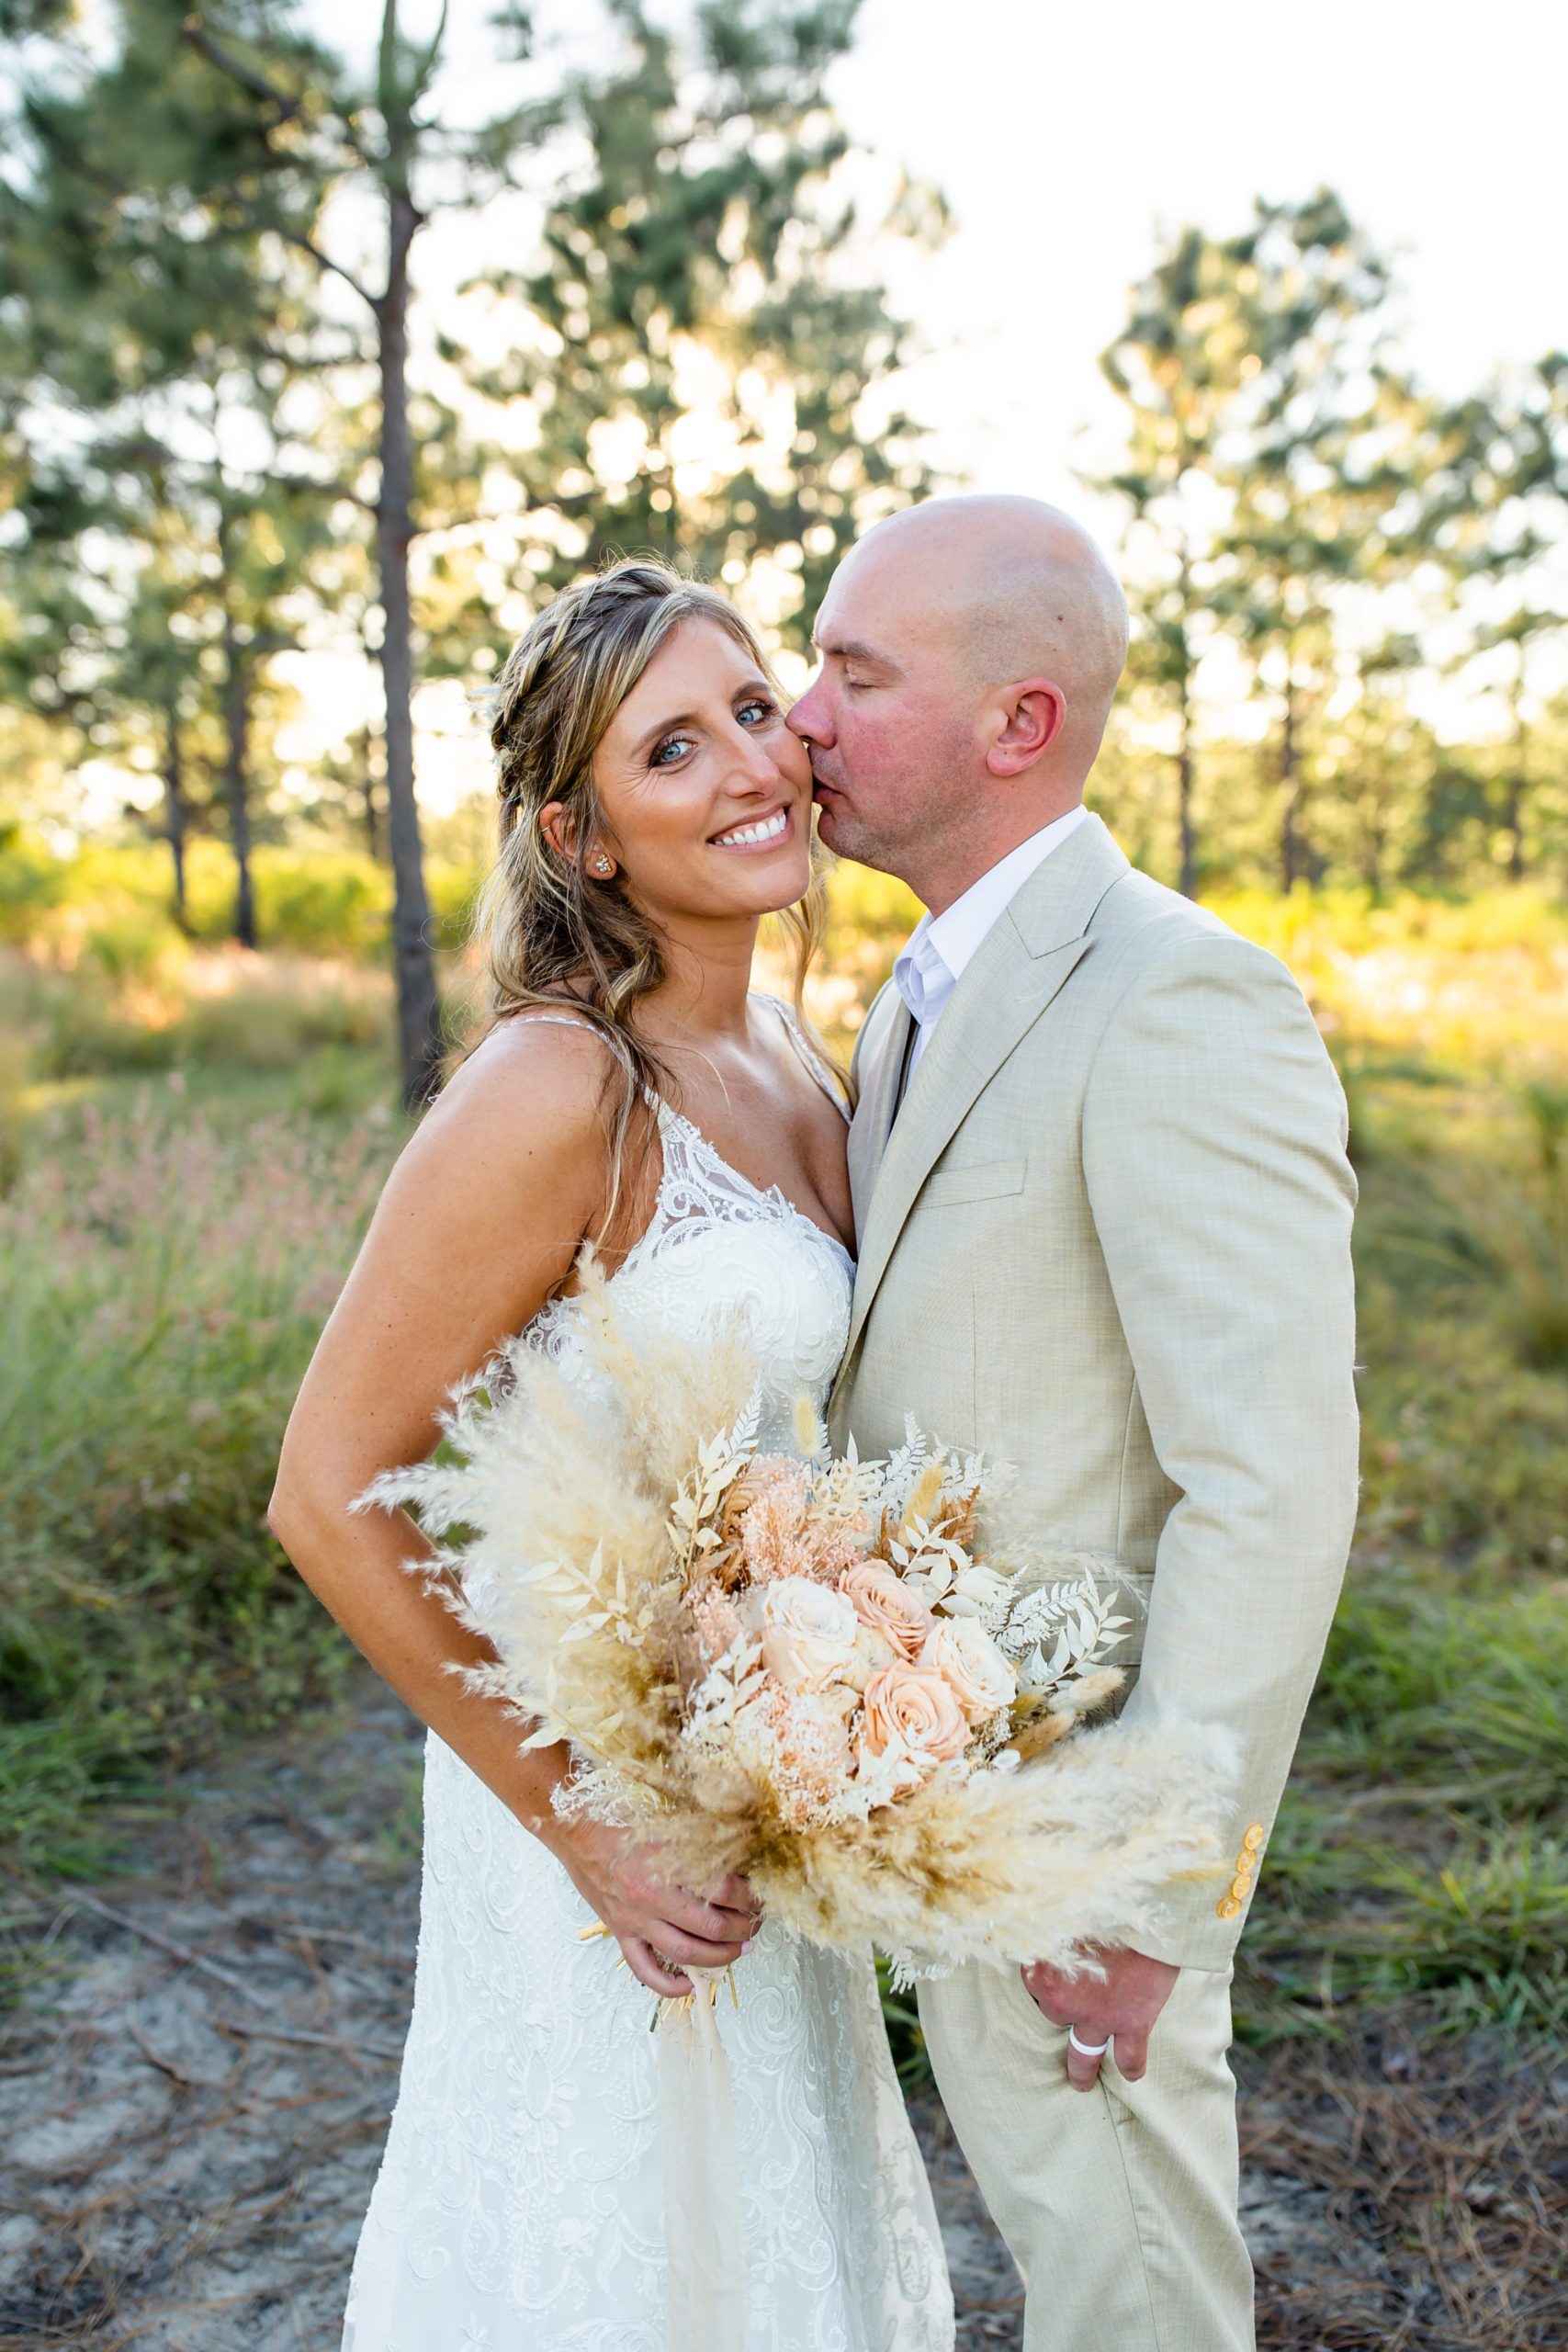 Lake Louisa Wedding Photos in Orlando, FL — Groom kissing Bride's cheek holding a dried bridal bouquet standing in field